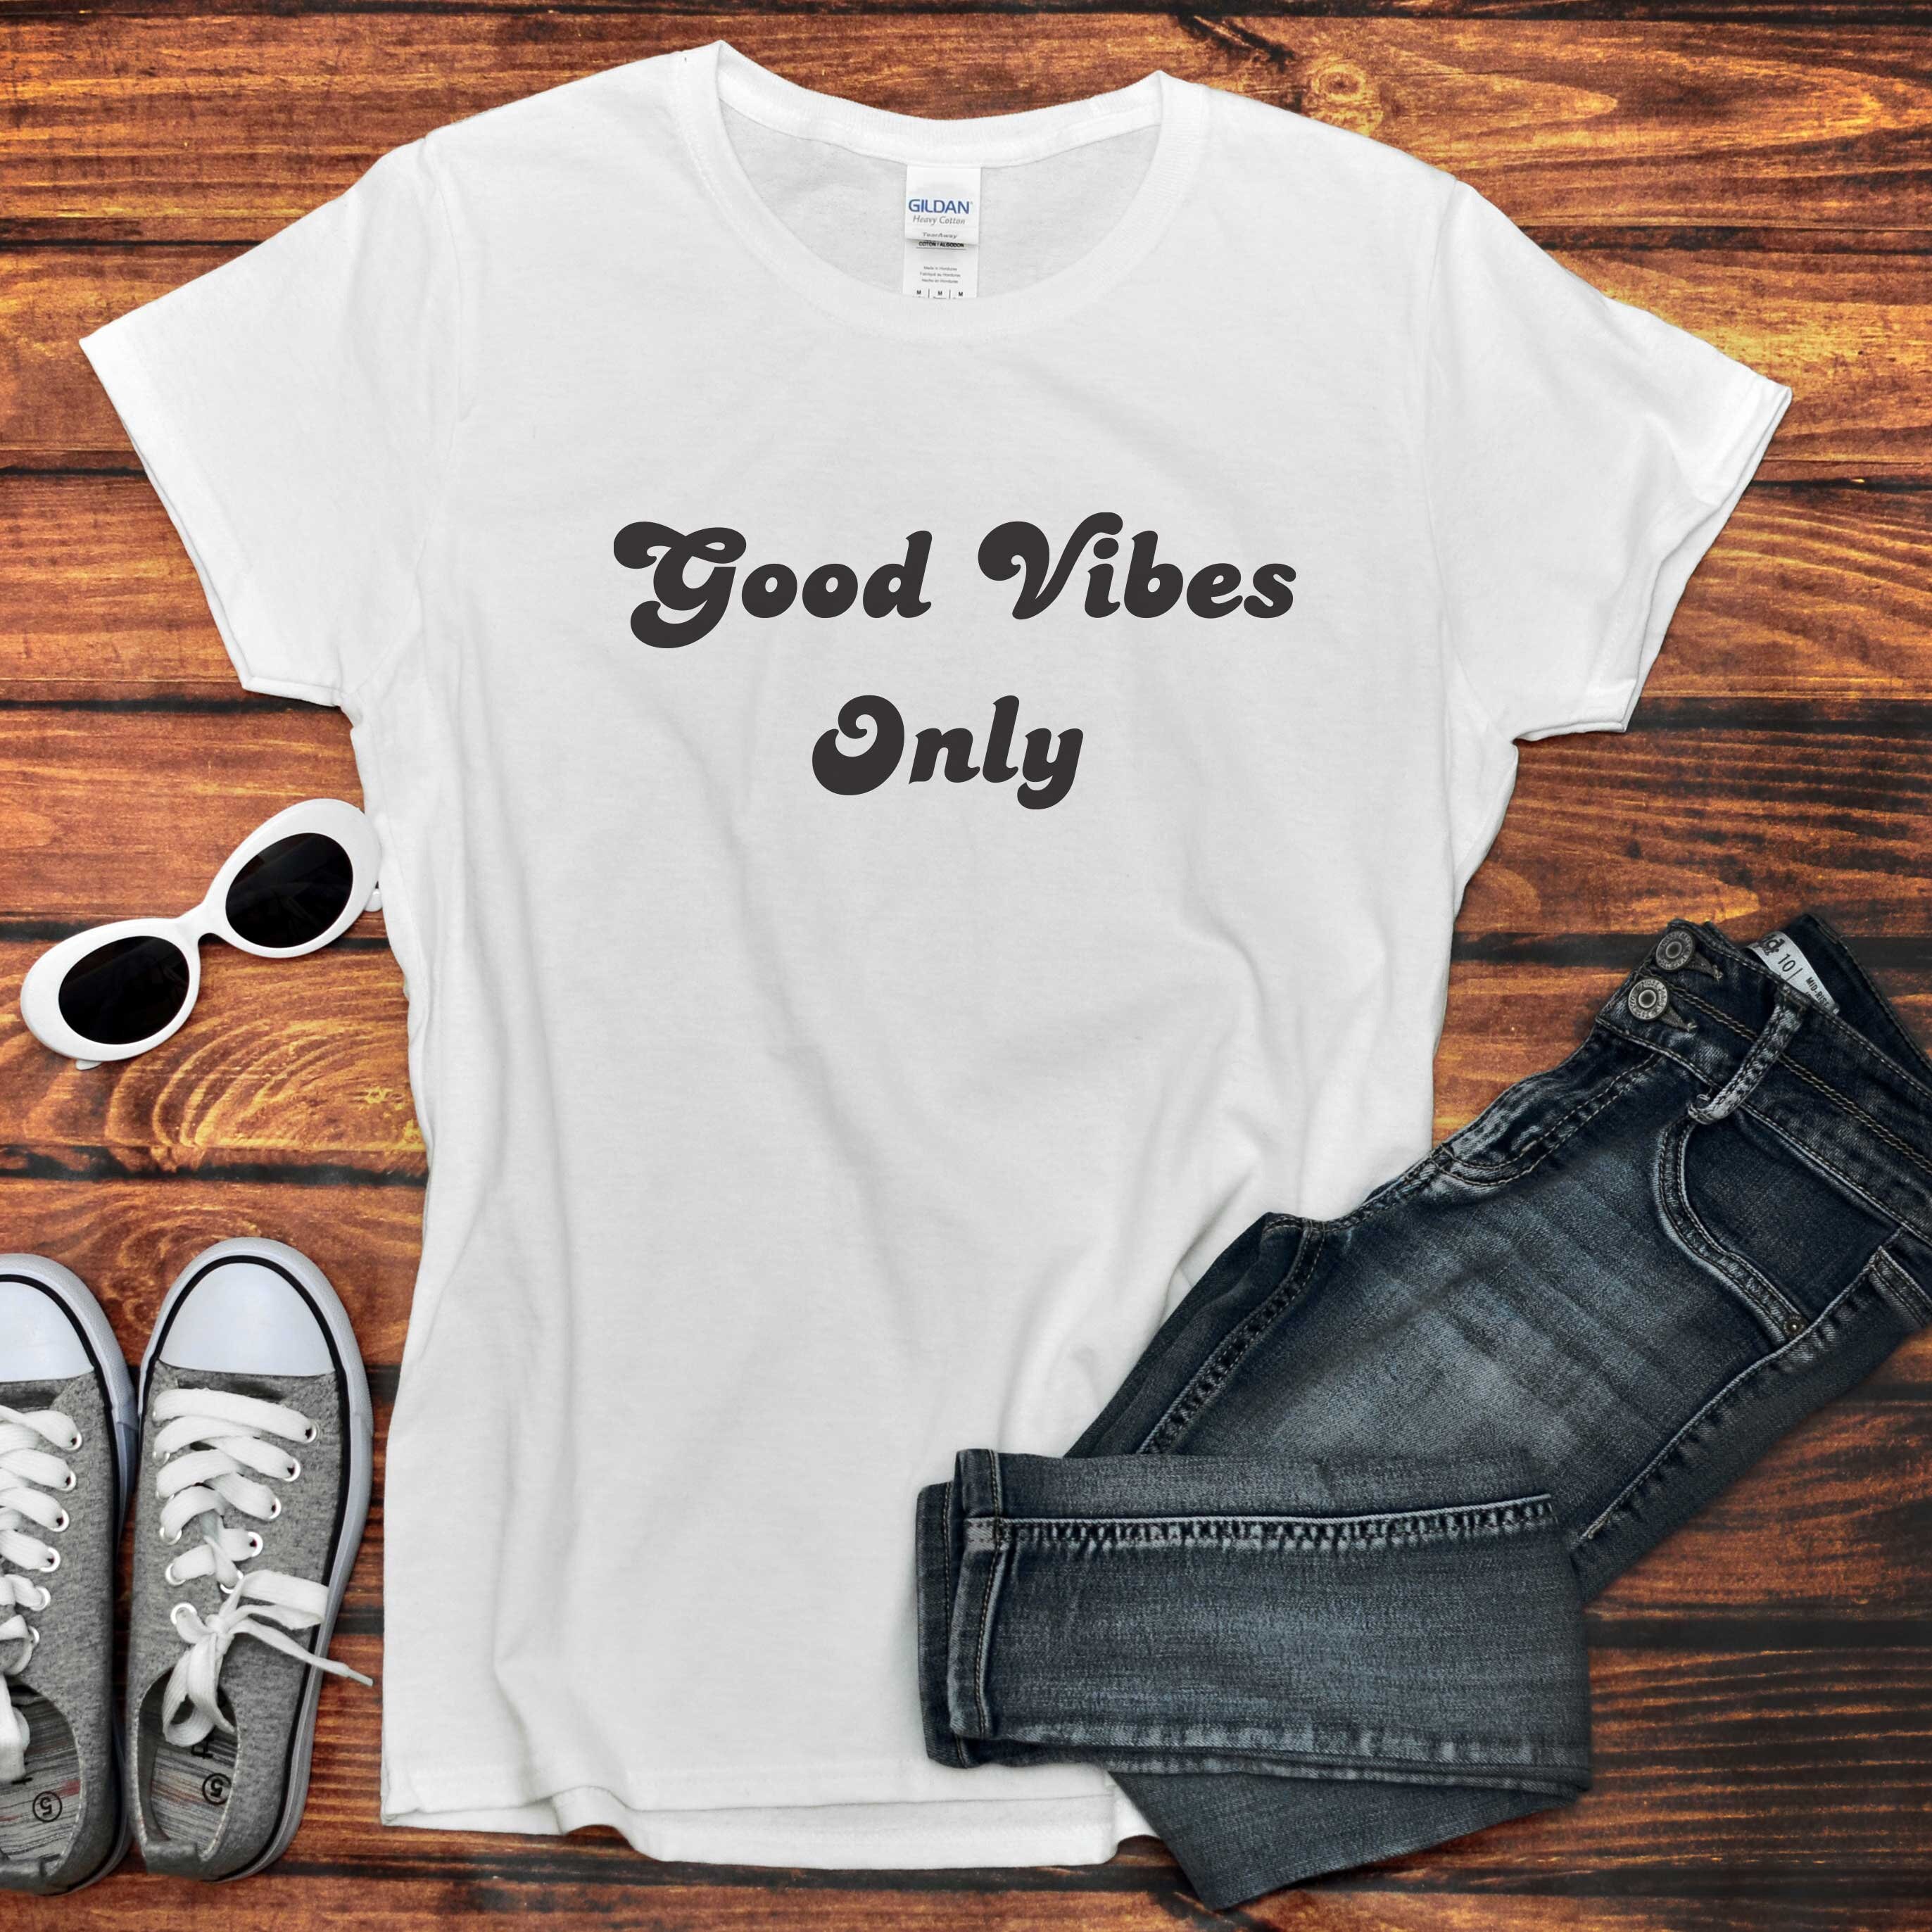 Good Vibes Only T-shirt Ladies Fitted Positive Fashion Top - Etsy UK